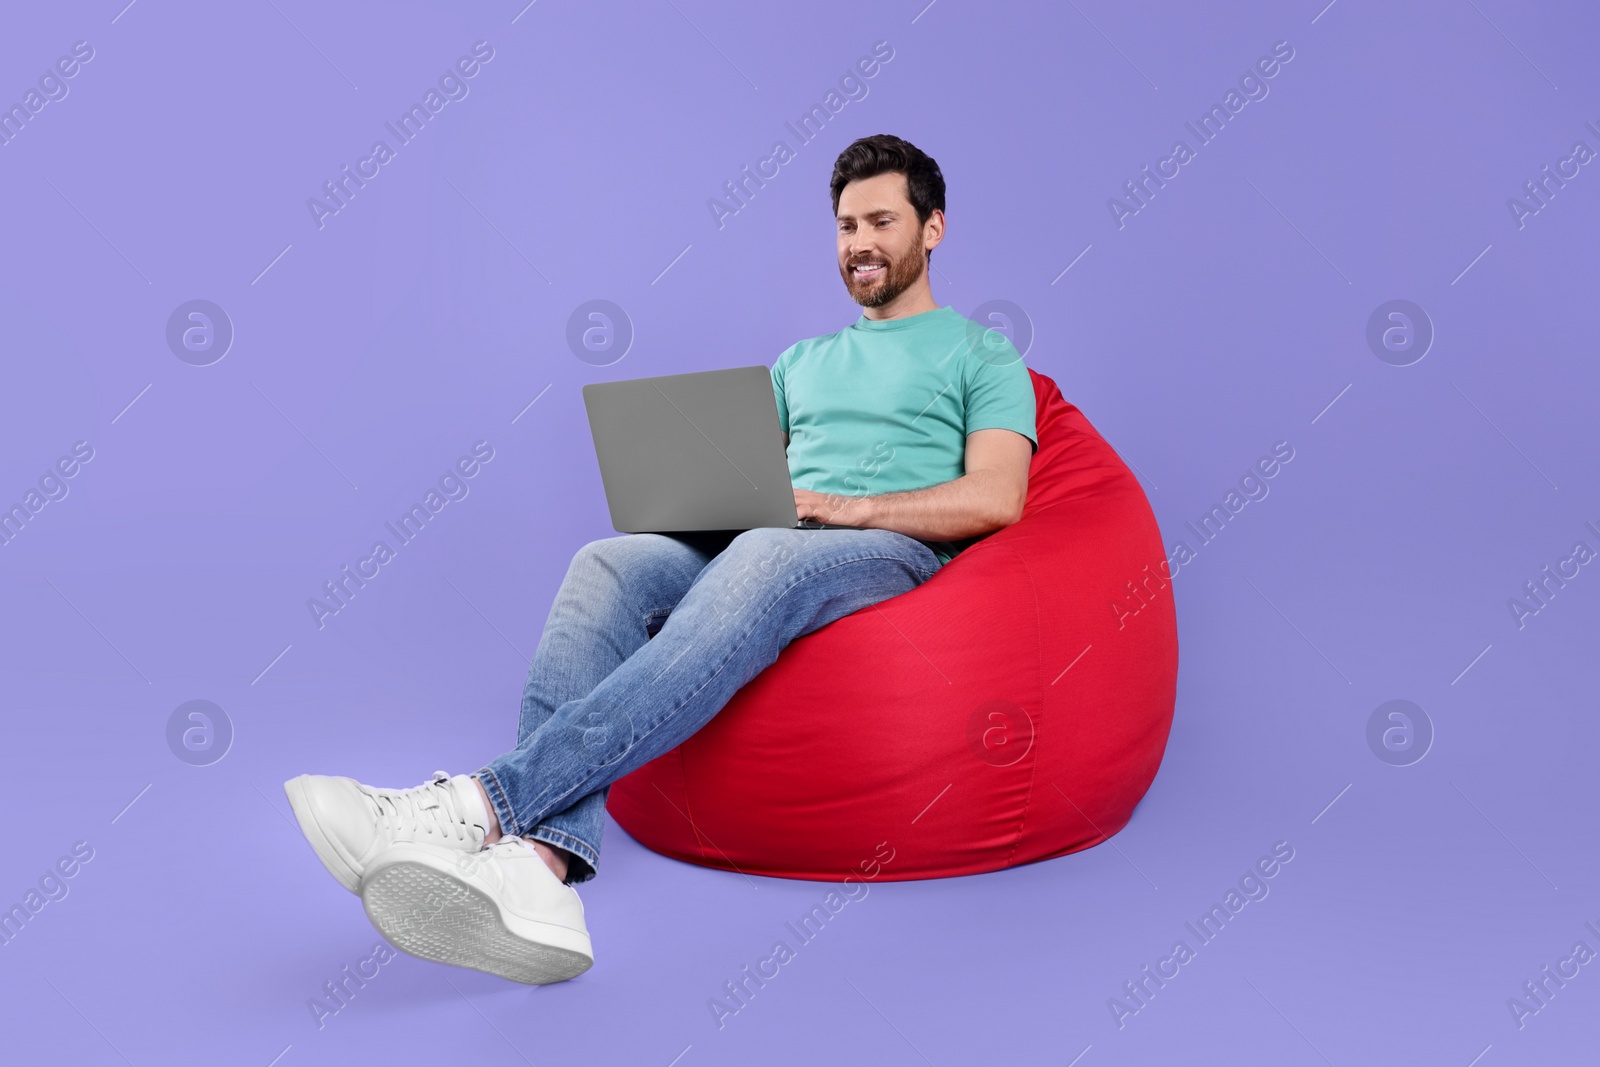 Photo of Happy man with laptop sitting on beanbag chair against purple background